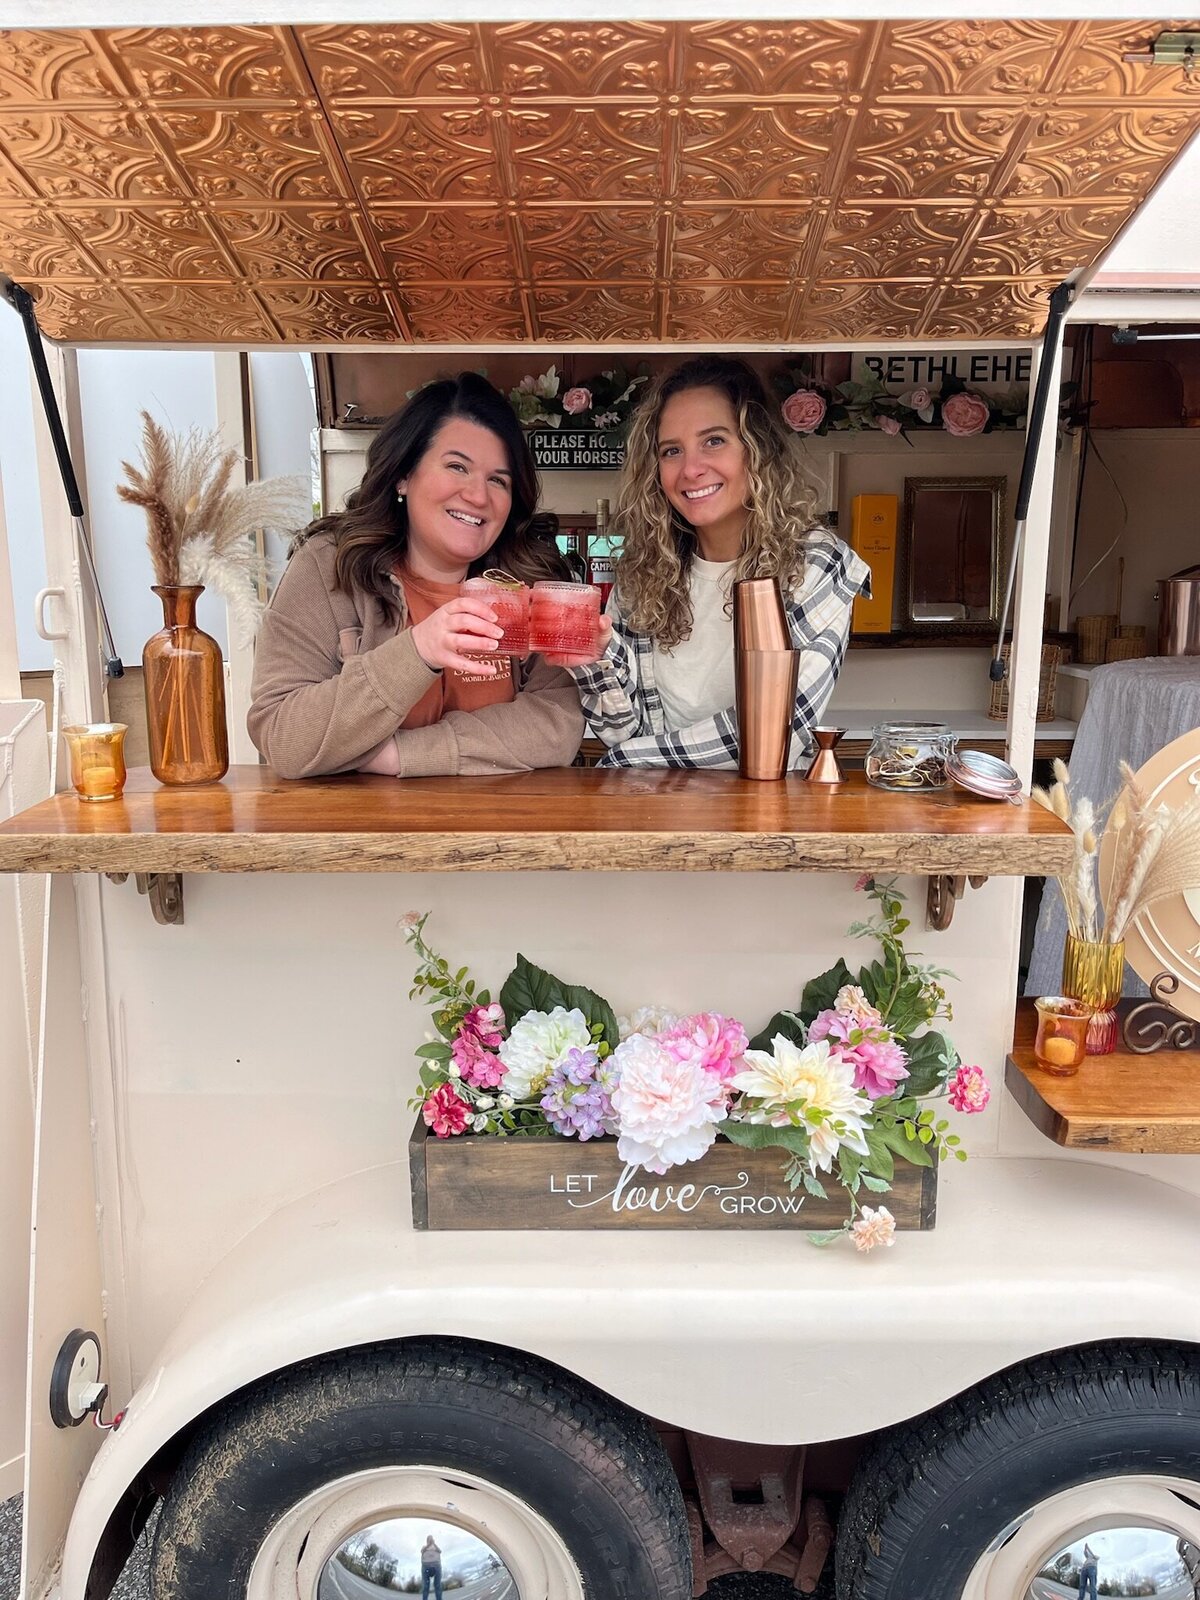 Owners pose in horse trailer bar with cocktails